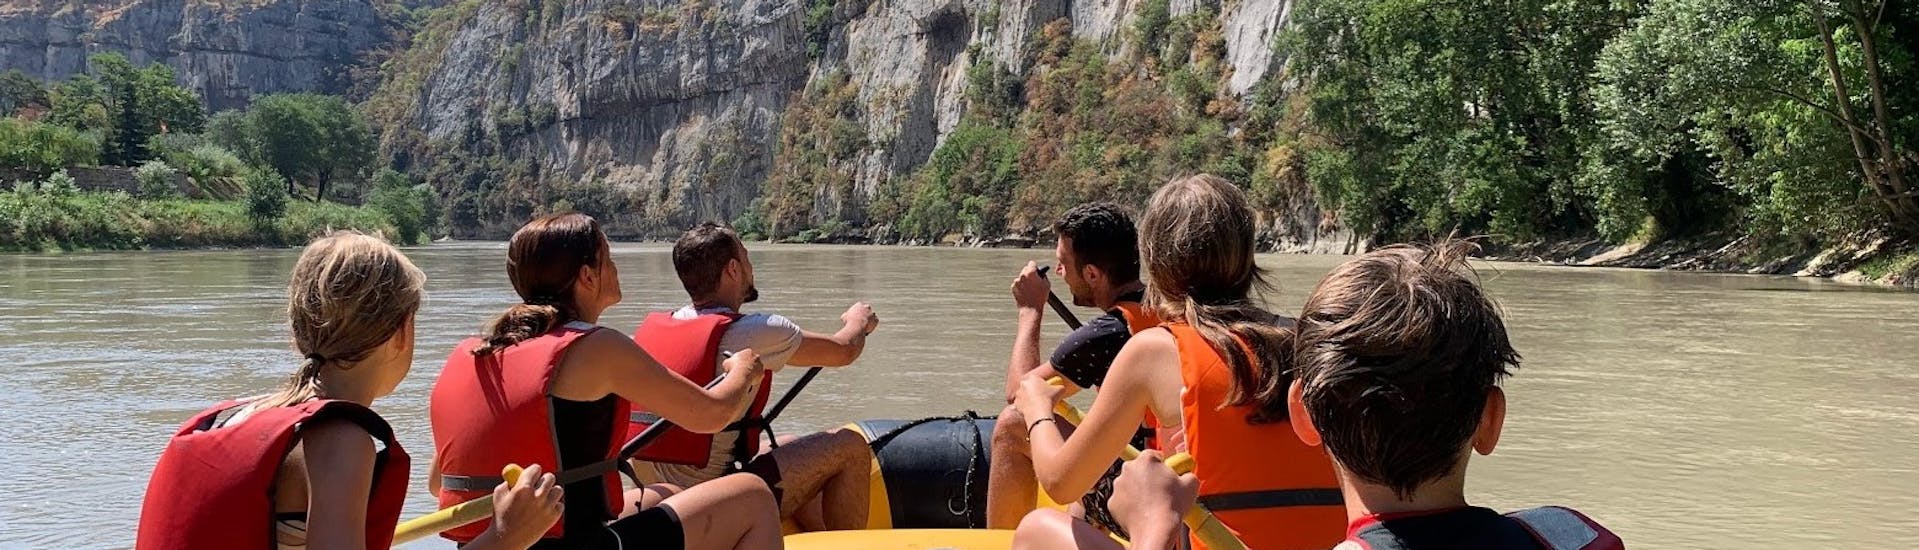 People enjoying the Rafting on the Adige River for families and friends with Xadventure Outdoor Lake Garda.